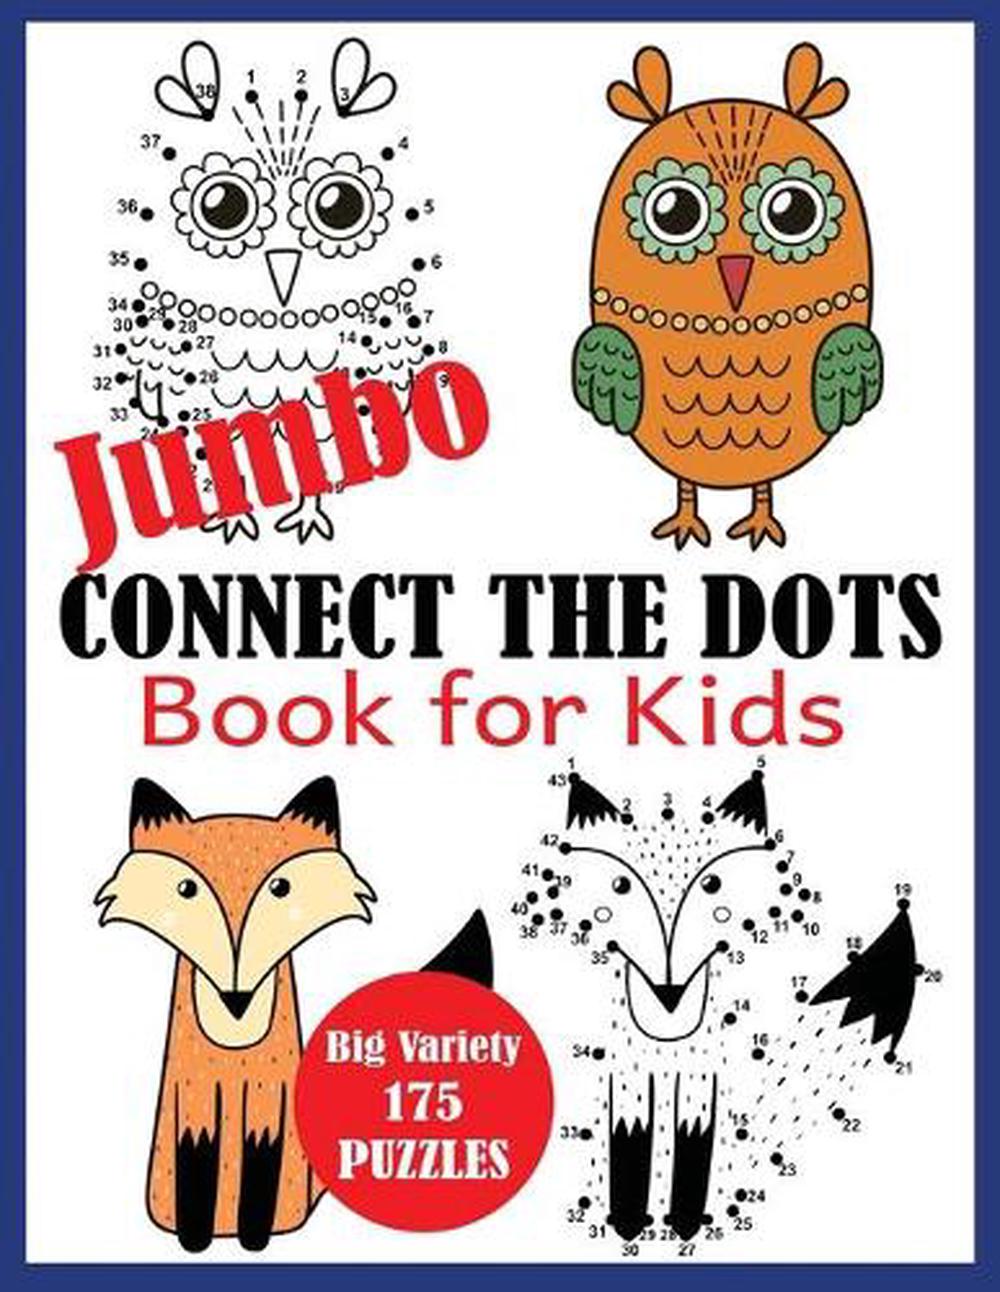 Connect The Dots Book Review